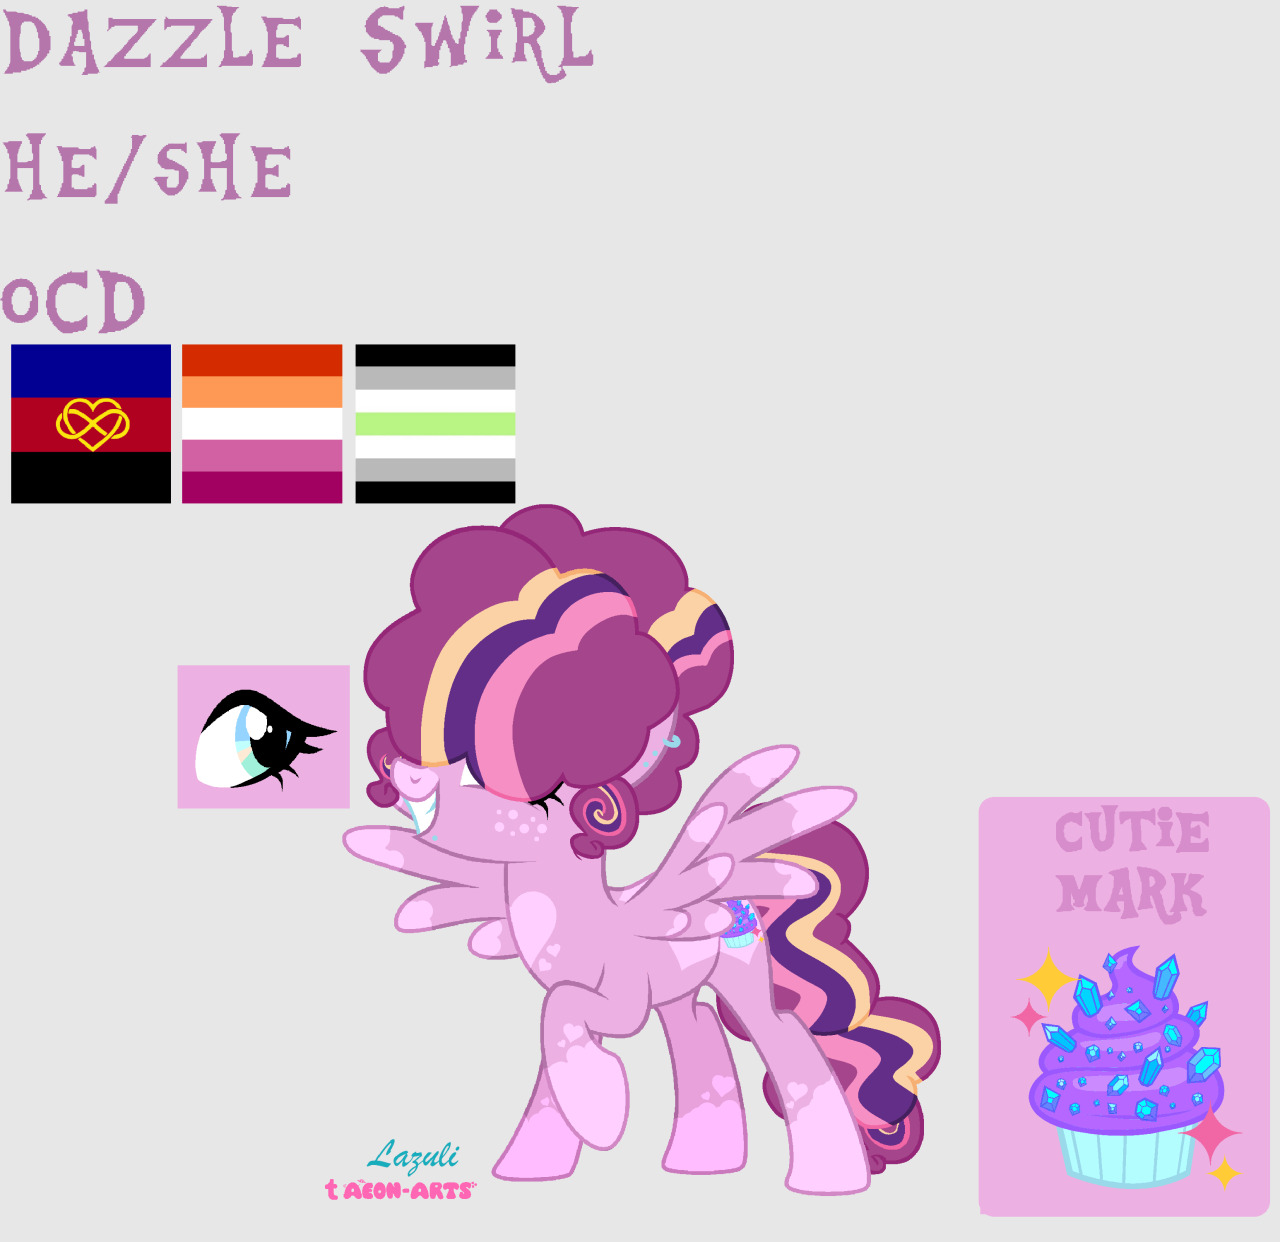 My Twipie kid design, Dazzle Swirl!Don’t let his appearance fool you...she’s more like Twilight than Pinkie! He sees baking as a science, rather than an act of love like her momma might. She does have a sweet tooth, particularly for rock candy. Pinkie Pie has a tiny bit of pegasus in her lineage, hence why Dazzle Swirl got wings over a unicorn horn like his mom, Twilight. Definitely went through a scene phase. In case it isn’t visible, she has snake bite piercings (among other piercings lol)! Overall is a pony who likes to figure out the science of sweets. Definitely acts like pre-friendship Twilight, but is not unkind and has a few select friends.I also like the idea of my Skypie oc/next gen being his younger sibling!yes you can draw this design! just @ me to give me credit!(base) #twipie #mlp next gen #mlp#pinkie pie#Twilight Sparkle#mlp twipie #My Little Pony  #my little pony friendship is magic #my oc#my art#my edit#dazzle swirl